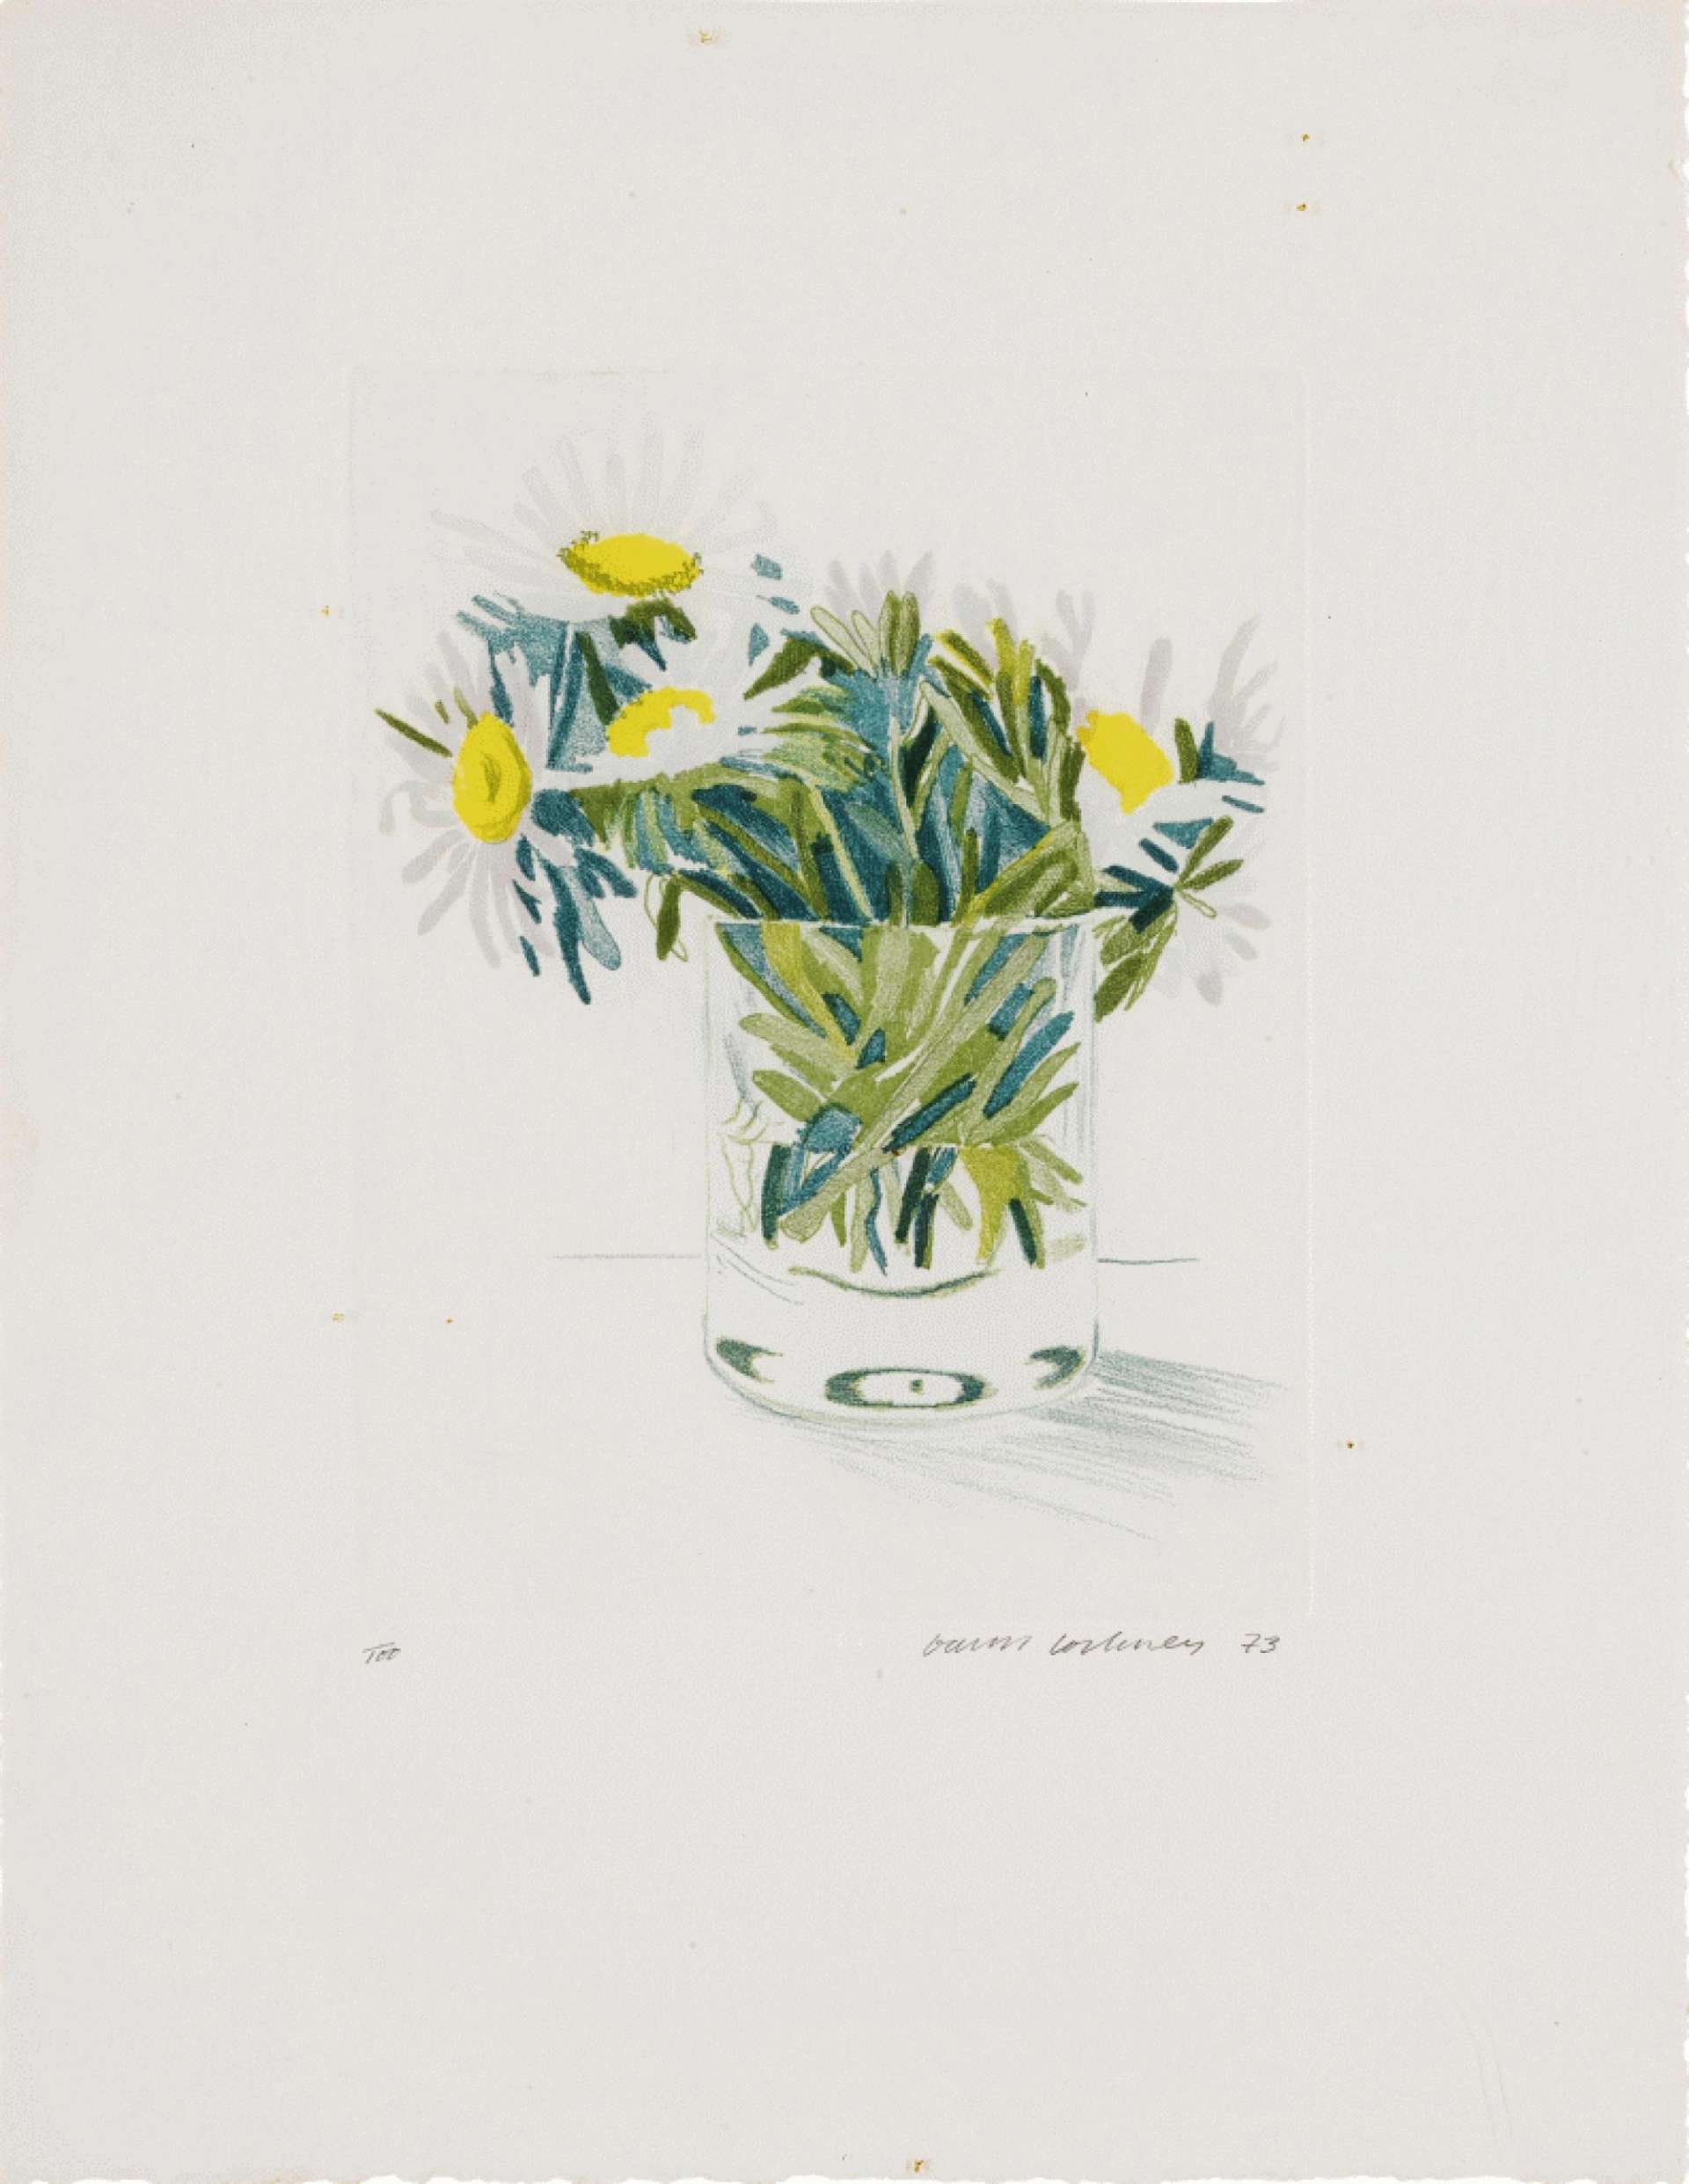 An etching and aquatint artwork by David Hockney depicting a bouquet of white flowers against a blank background.